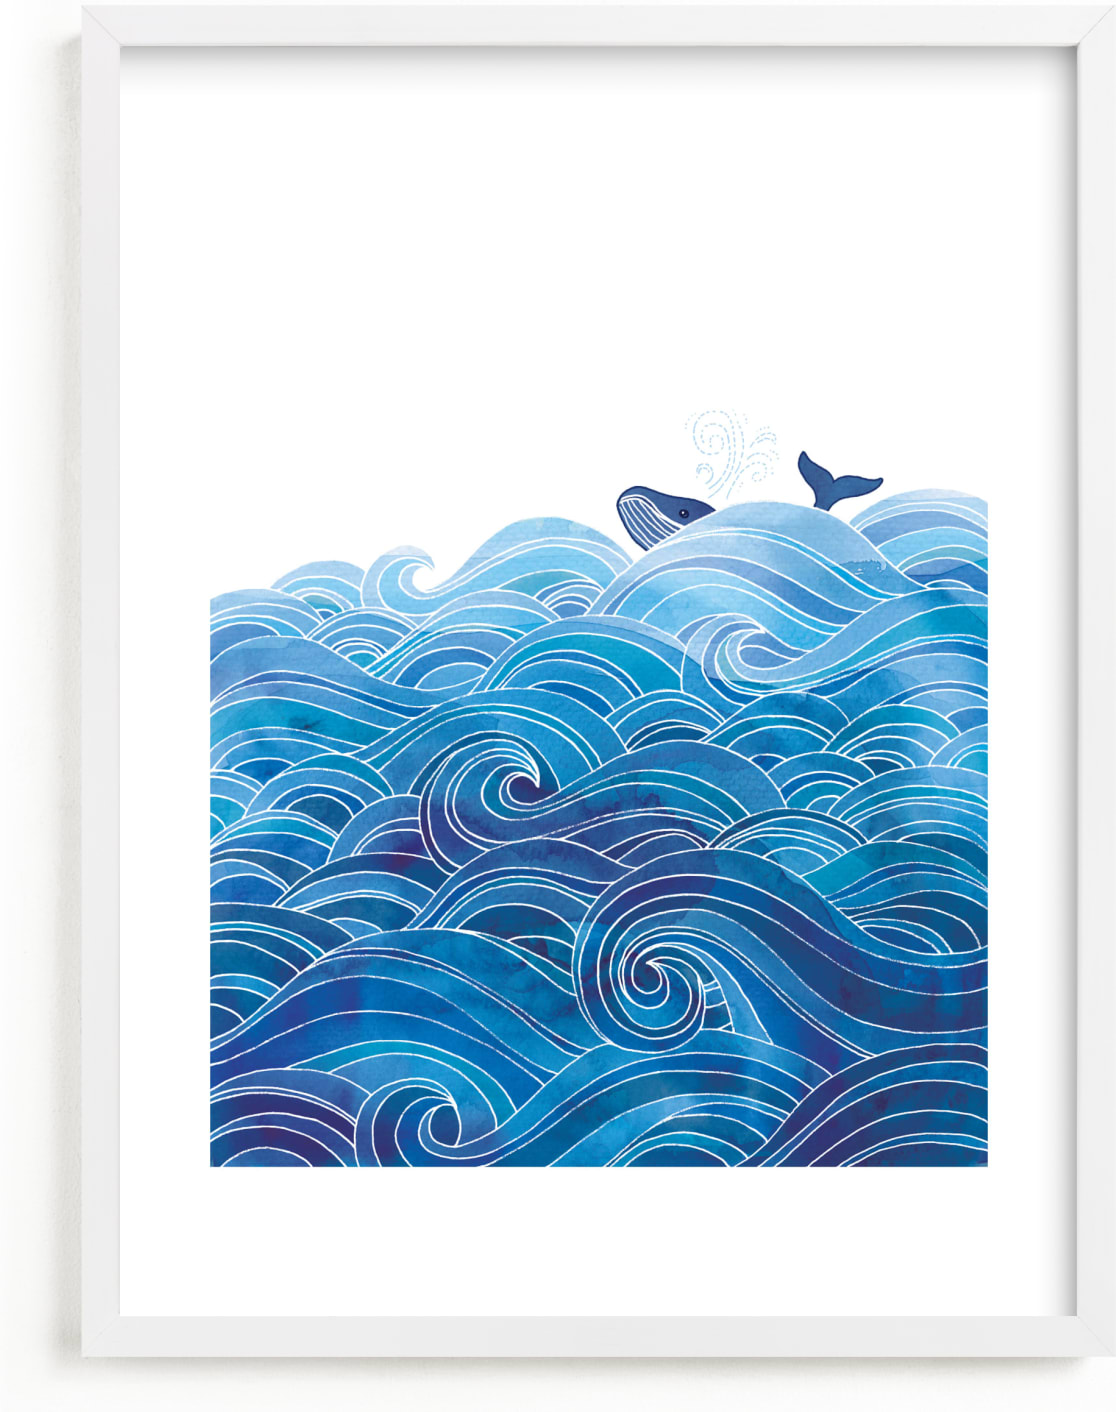 This is a blue kids wall art by Stardust Design Studio called seas the day.